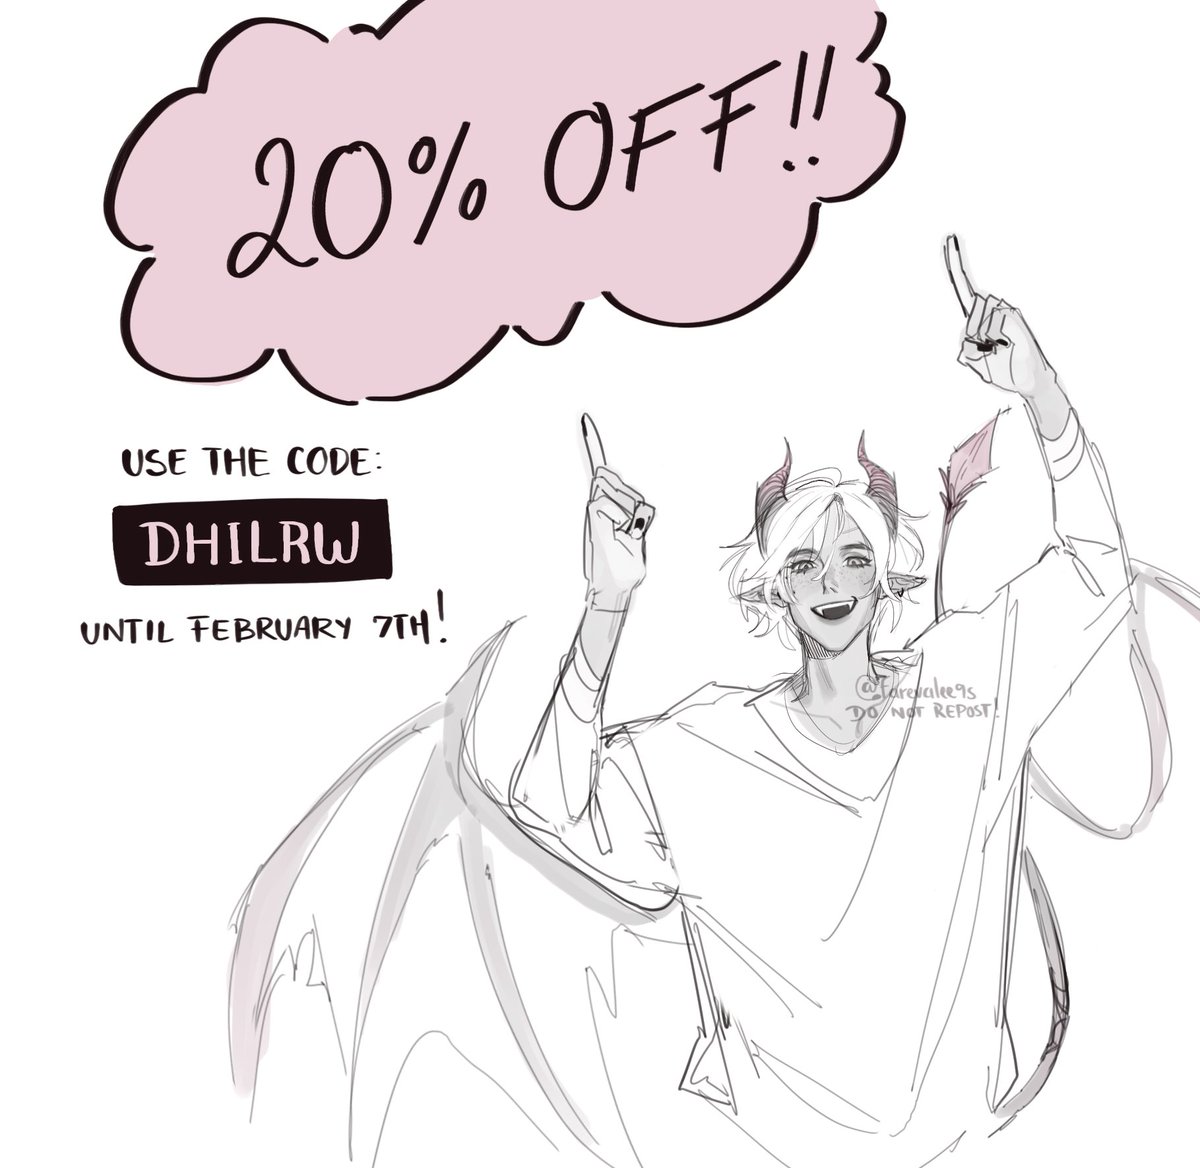 20% OFF ON MY INPRNT SH🔅P!

Use the code DHILRW on any purchase and the discount will be applied!

Active until February 7th!

‼️ FREE WORLDWIDE SHlPPlNG ON PURCHASES OVER 30 USD (January 31st only!) ‼️

🔗 below!! 